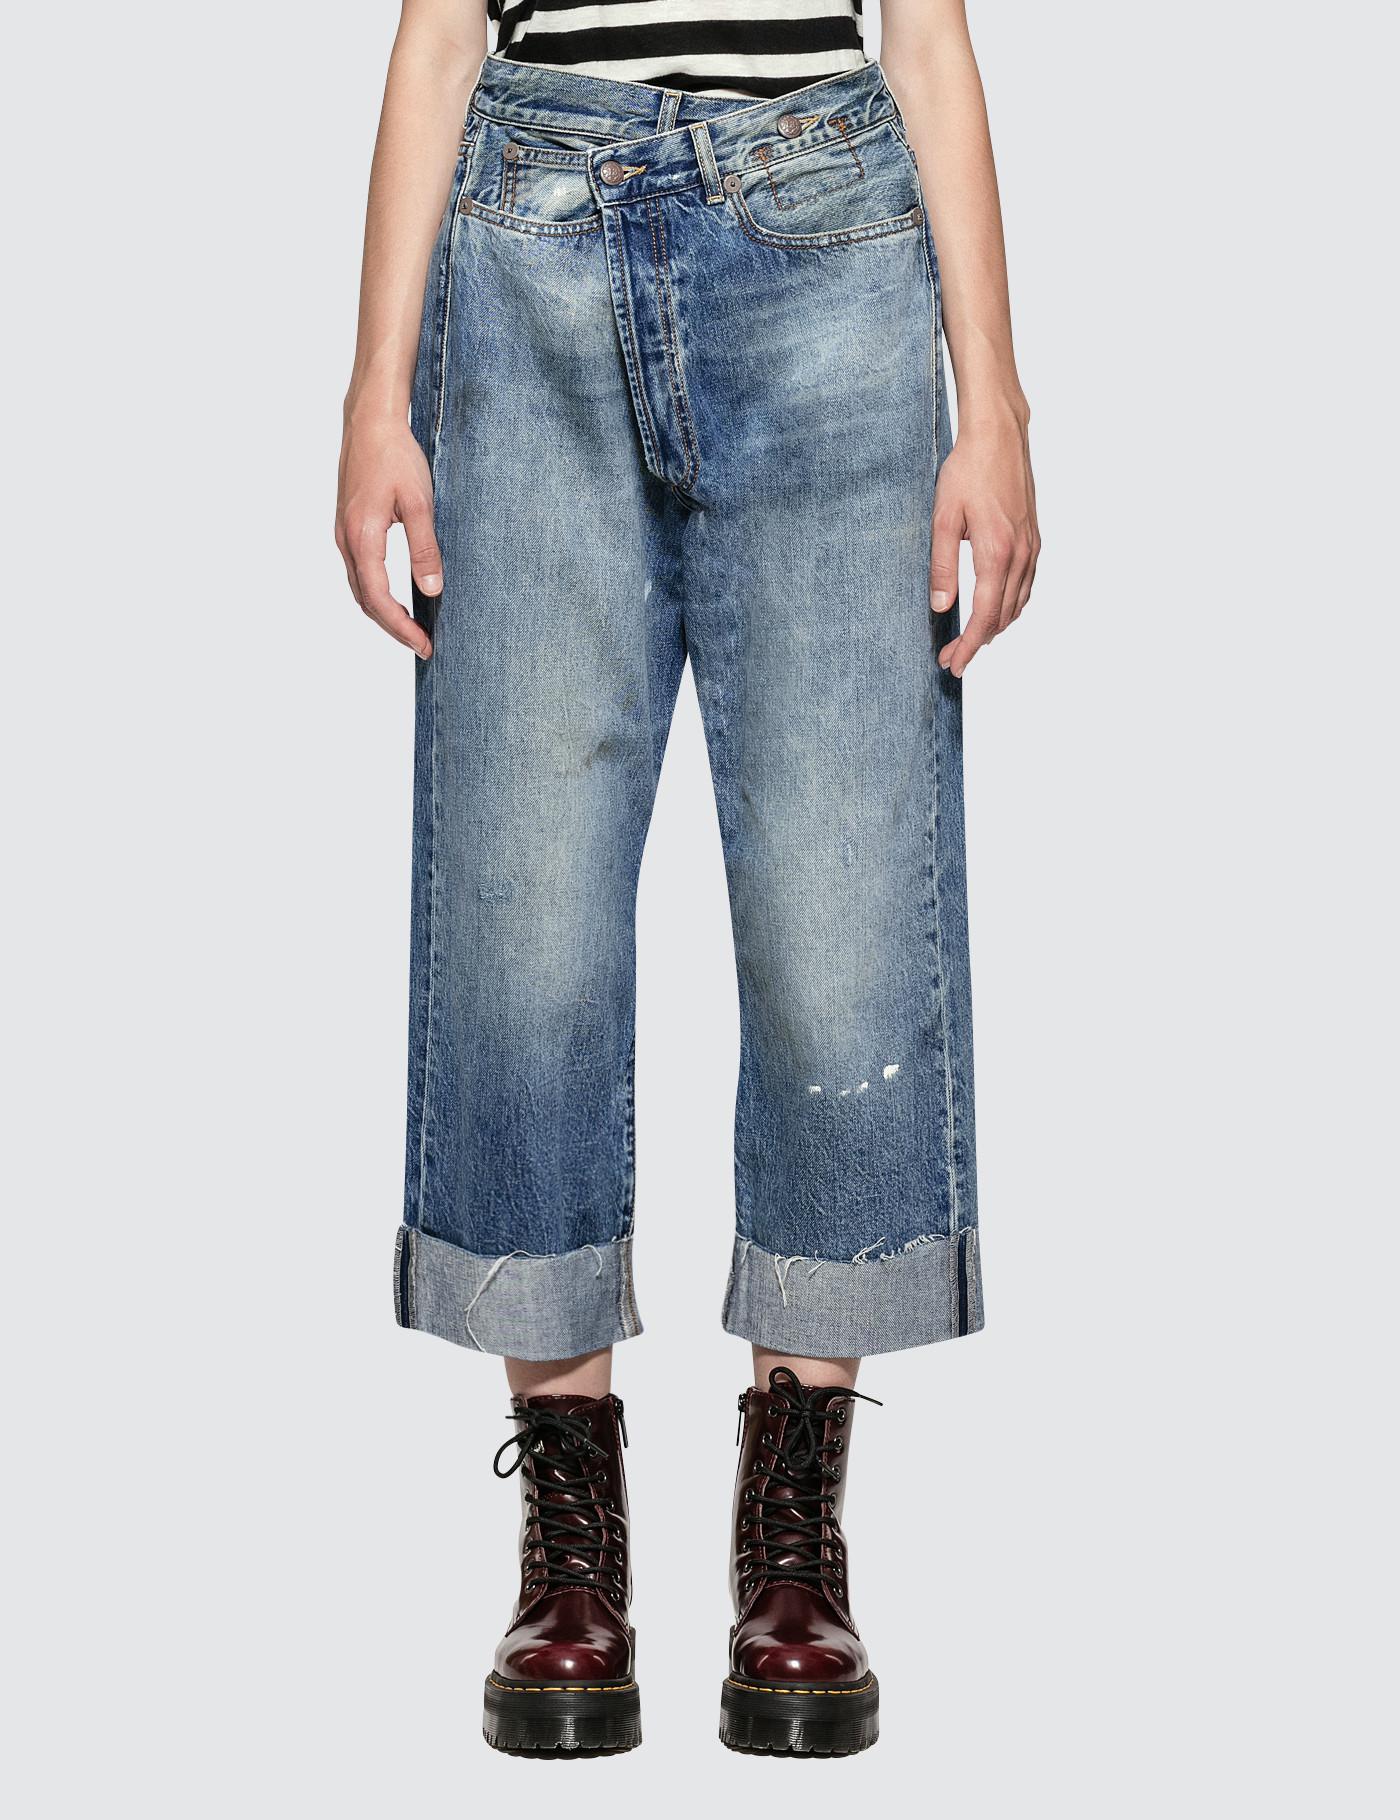 R13 Denim Crossover Jeans in Blue - Lyst